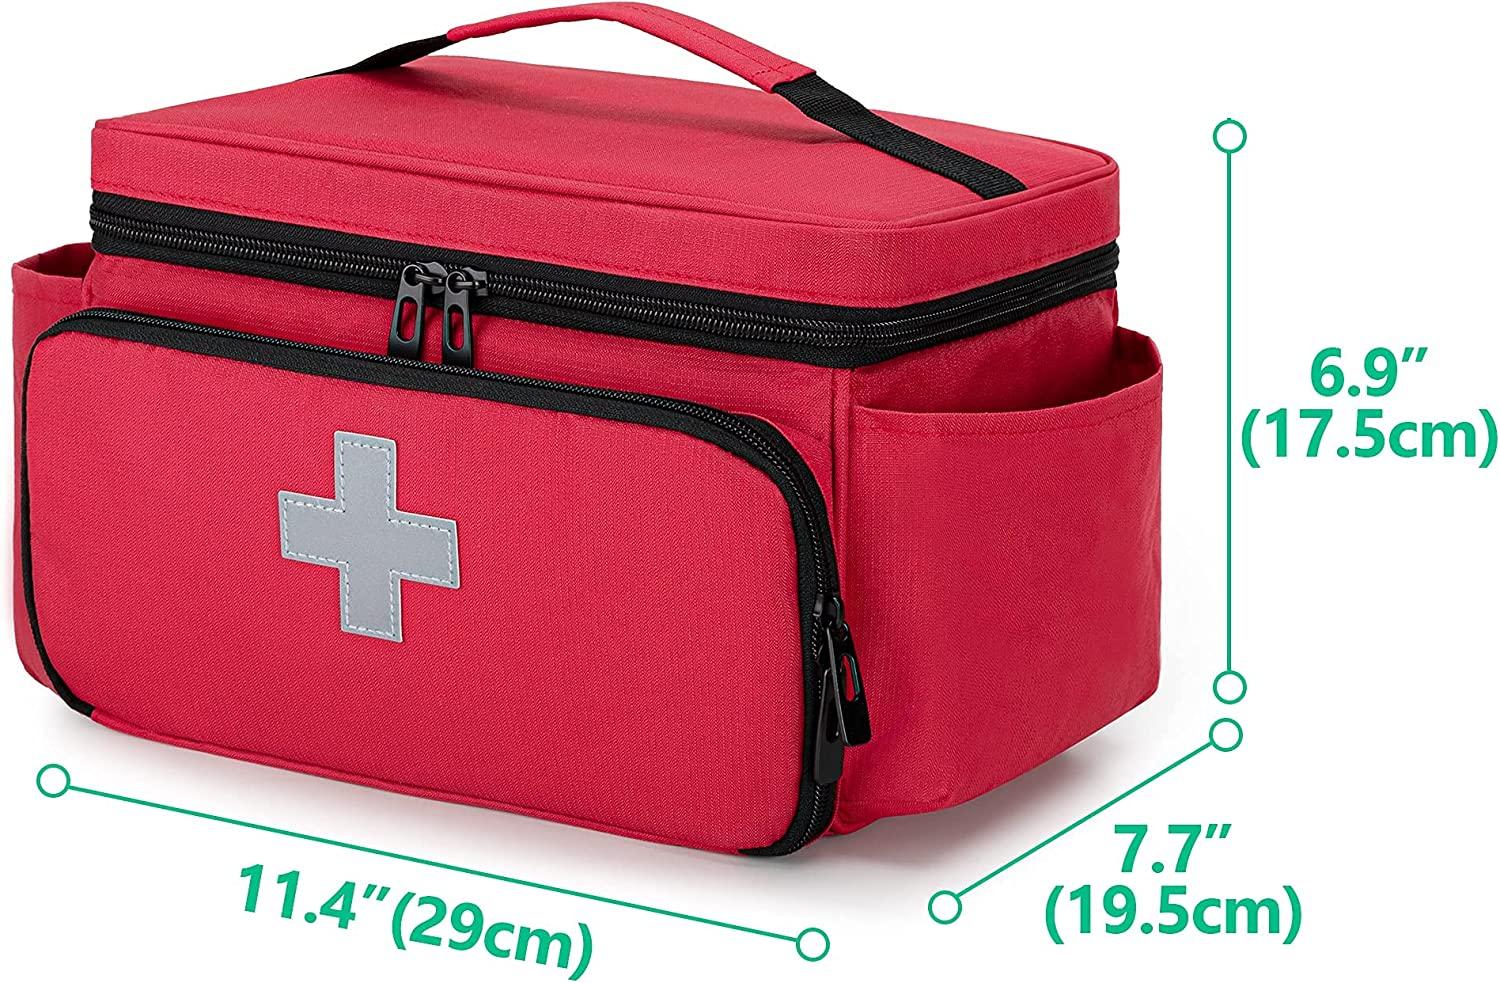 CURMIO Small Medicine Storage Bag Empty, Family First Aid Organizer Box for  Emergency Medical Kits, Red (Bag Only, Patent Pending)